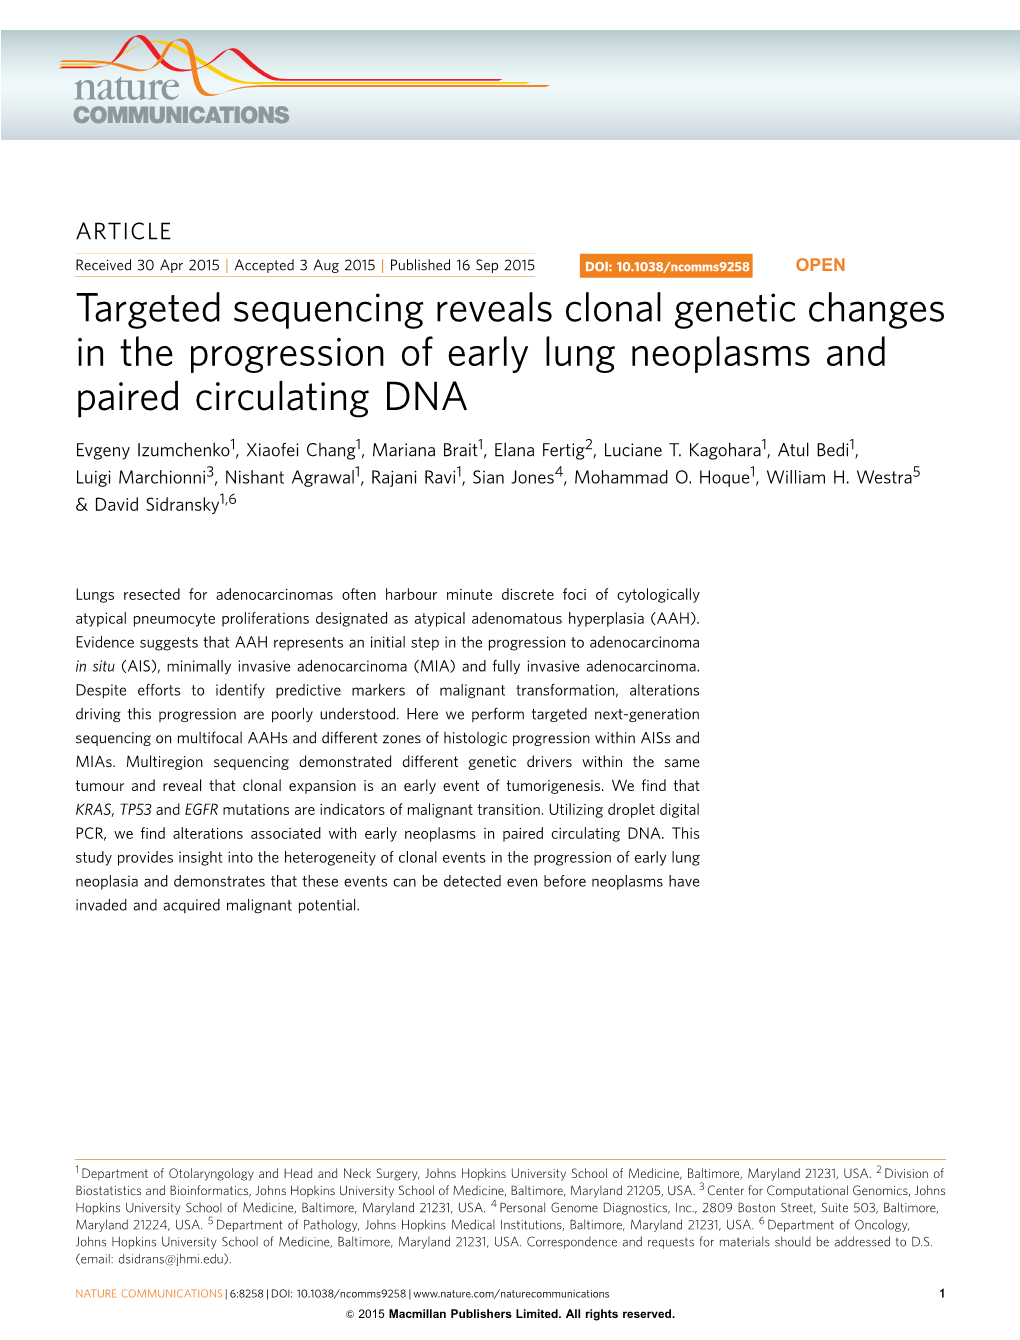 Targeted Sequencing Reveals Clonal Genetic Changes in the Progression of Early Lung Neoplasms and Paired Circulating DNA